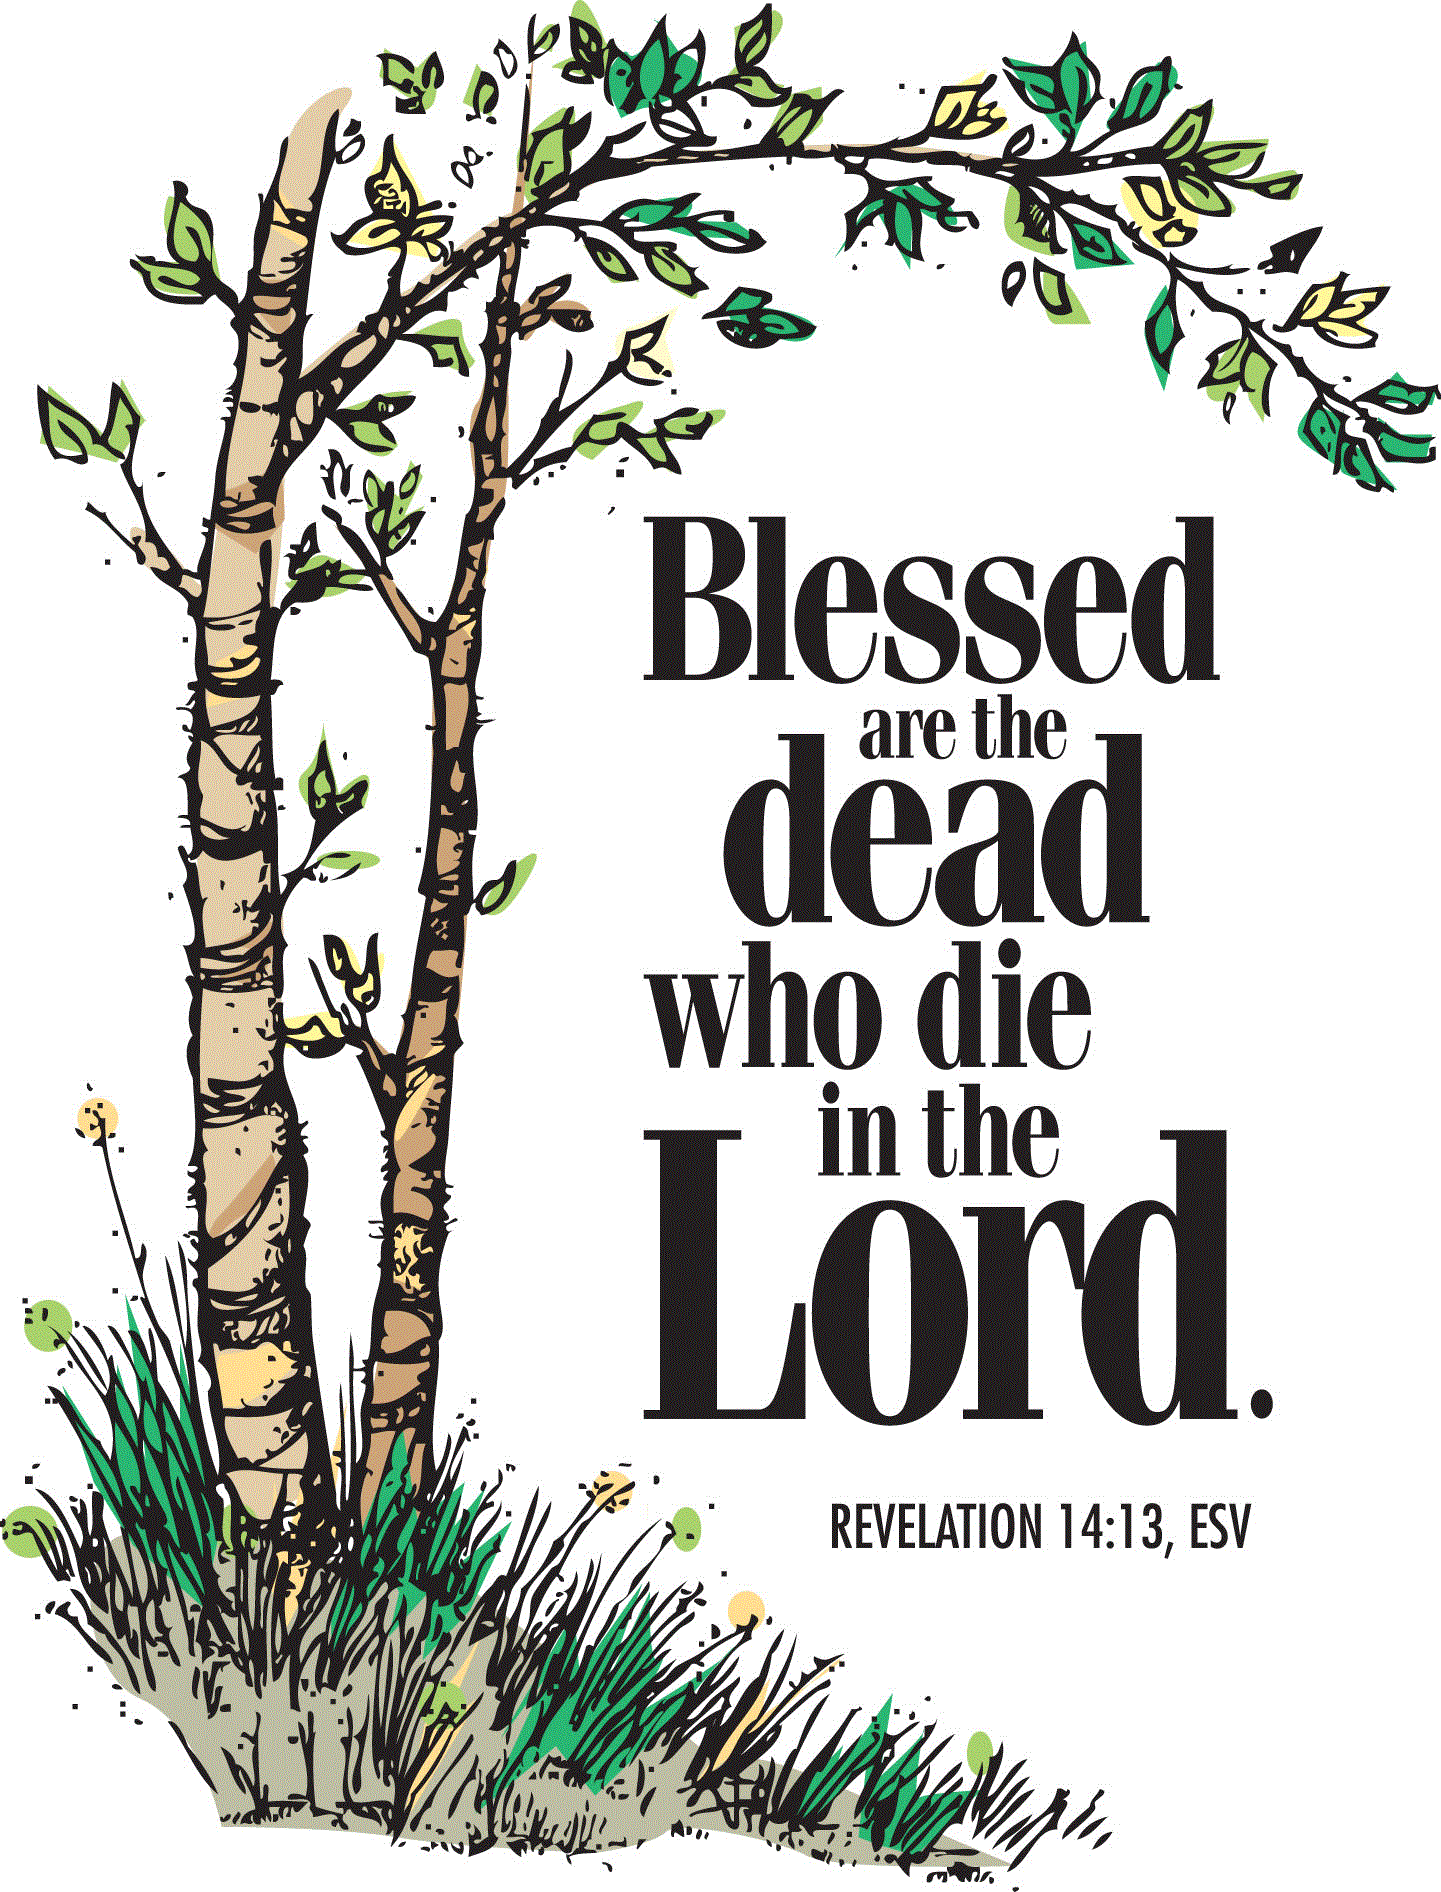 blessed are the dead who die in the Lord revalation 14:13 esv text beside two small trees with arching branches